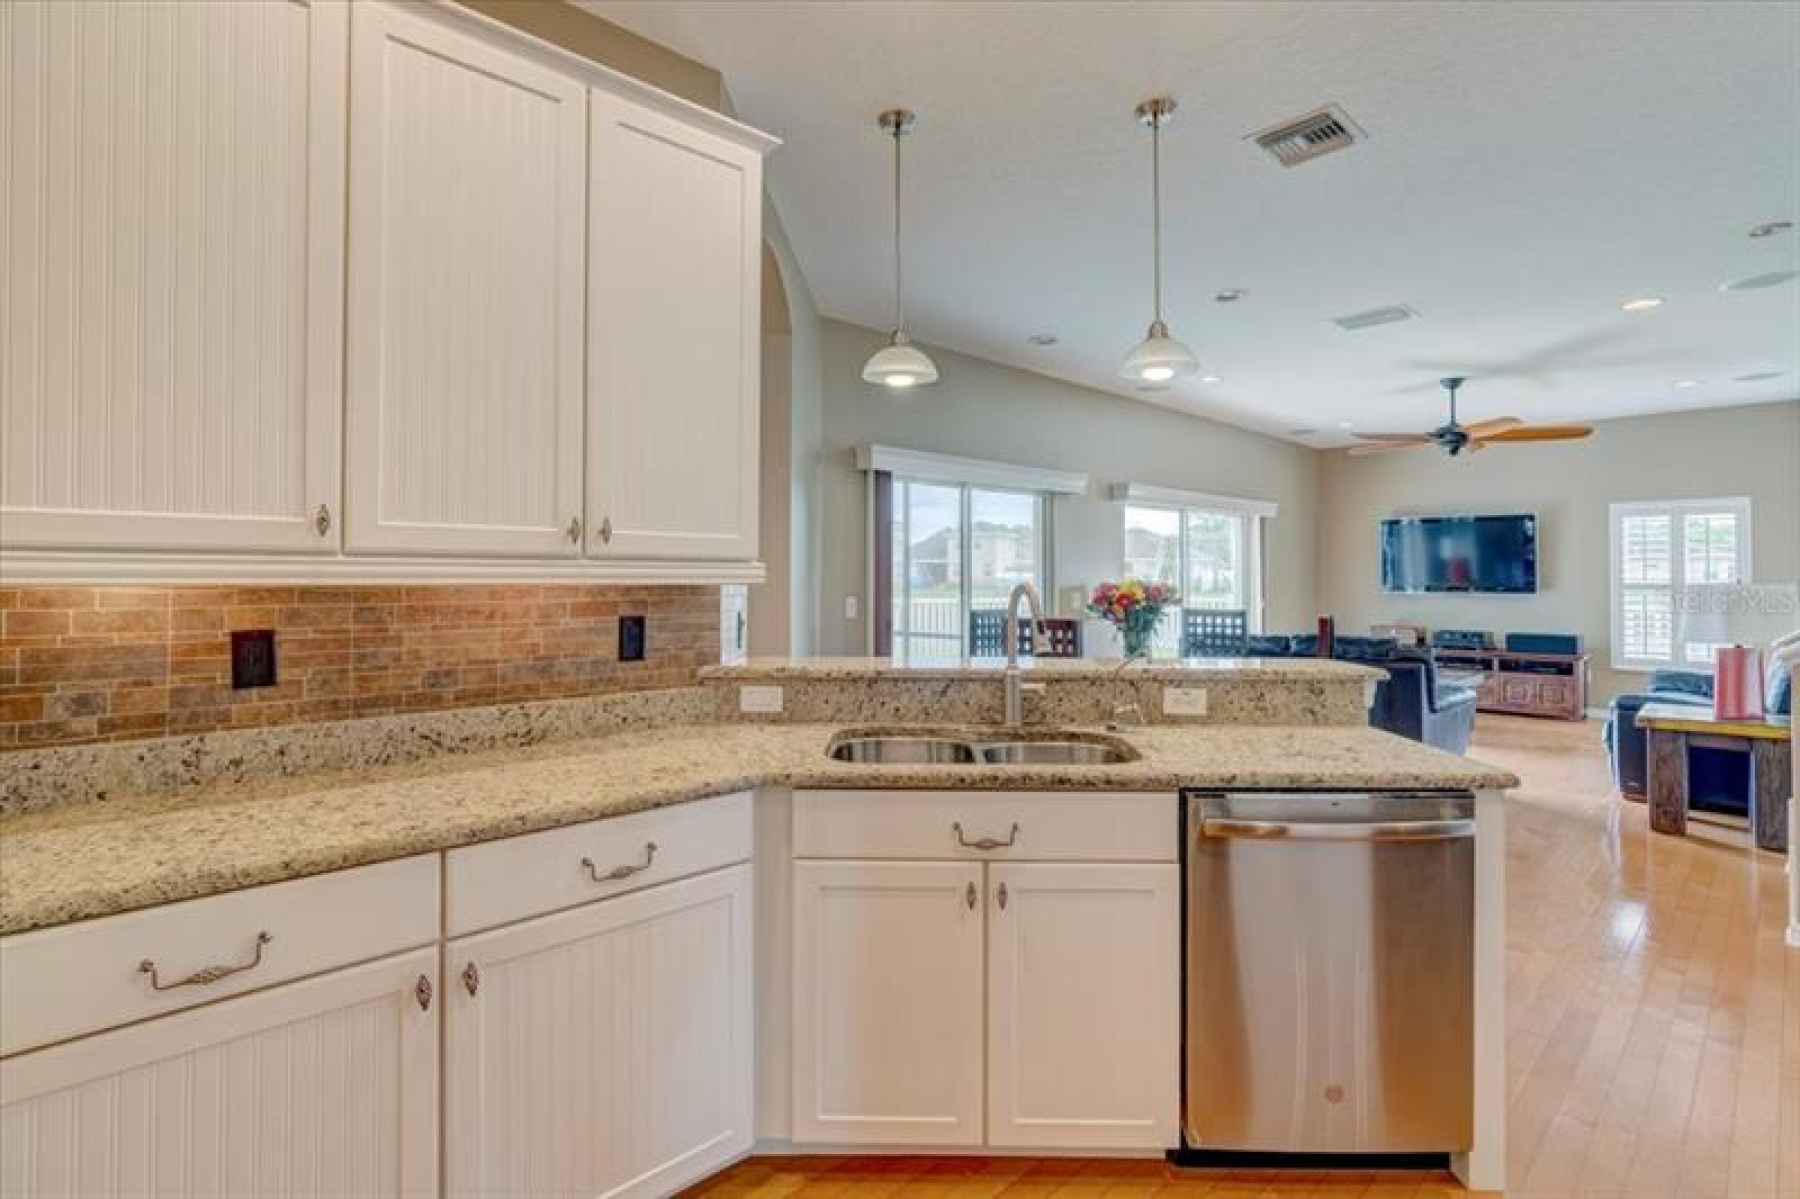 Enjoy the beautiful, open kitchen, with granite counters and wood cabinetry, overlooking the family 